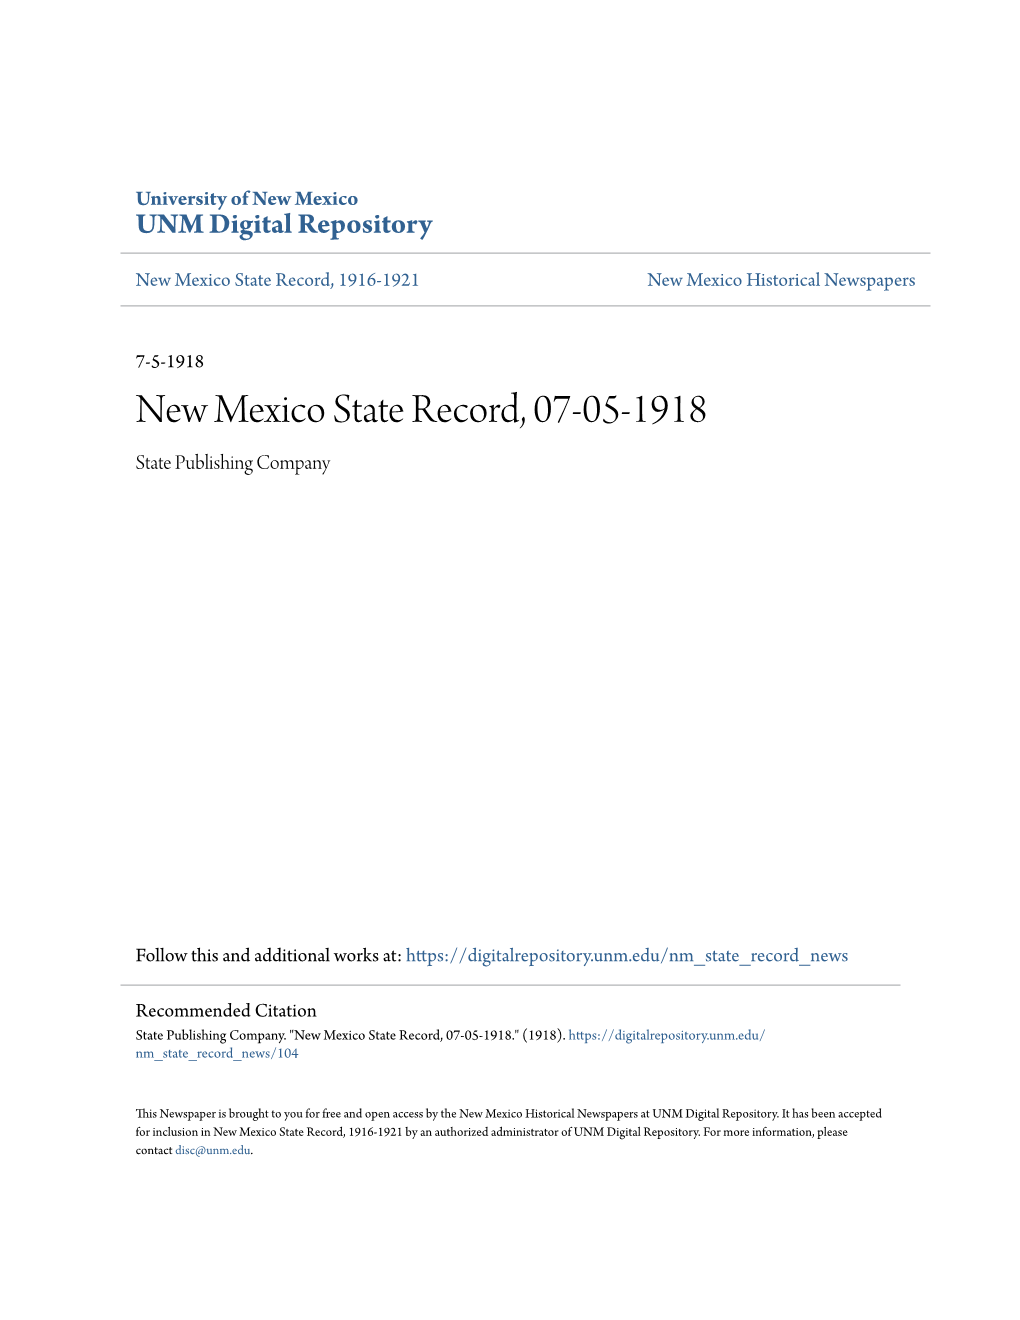 New Mexico State Record, 07-05-1918 State Publishing Company